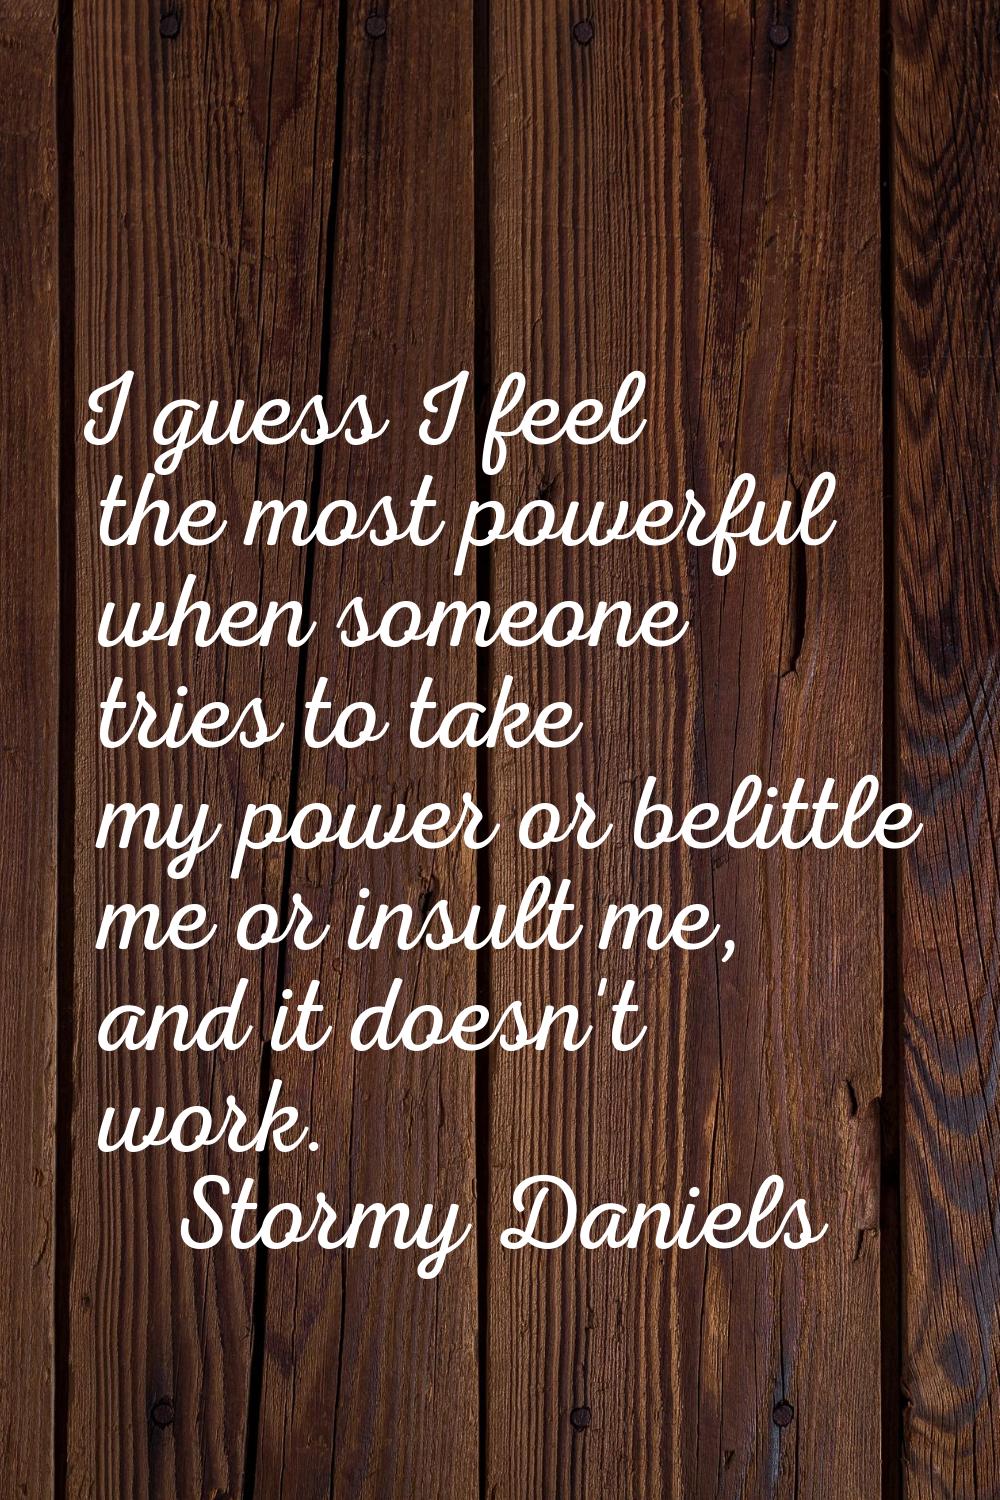 I guess I feel the most powerful when someone tries to take my power or belittle me or insult me, a